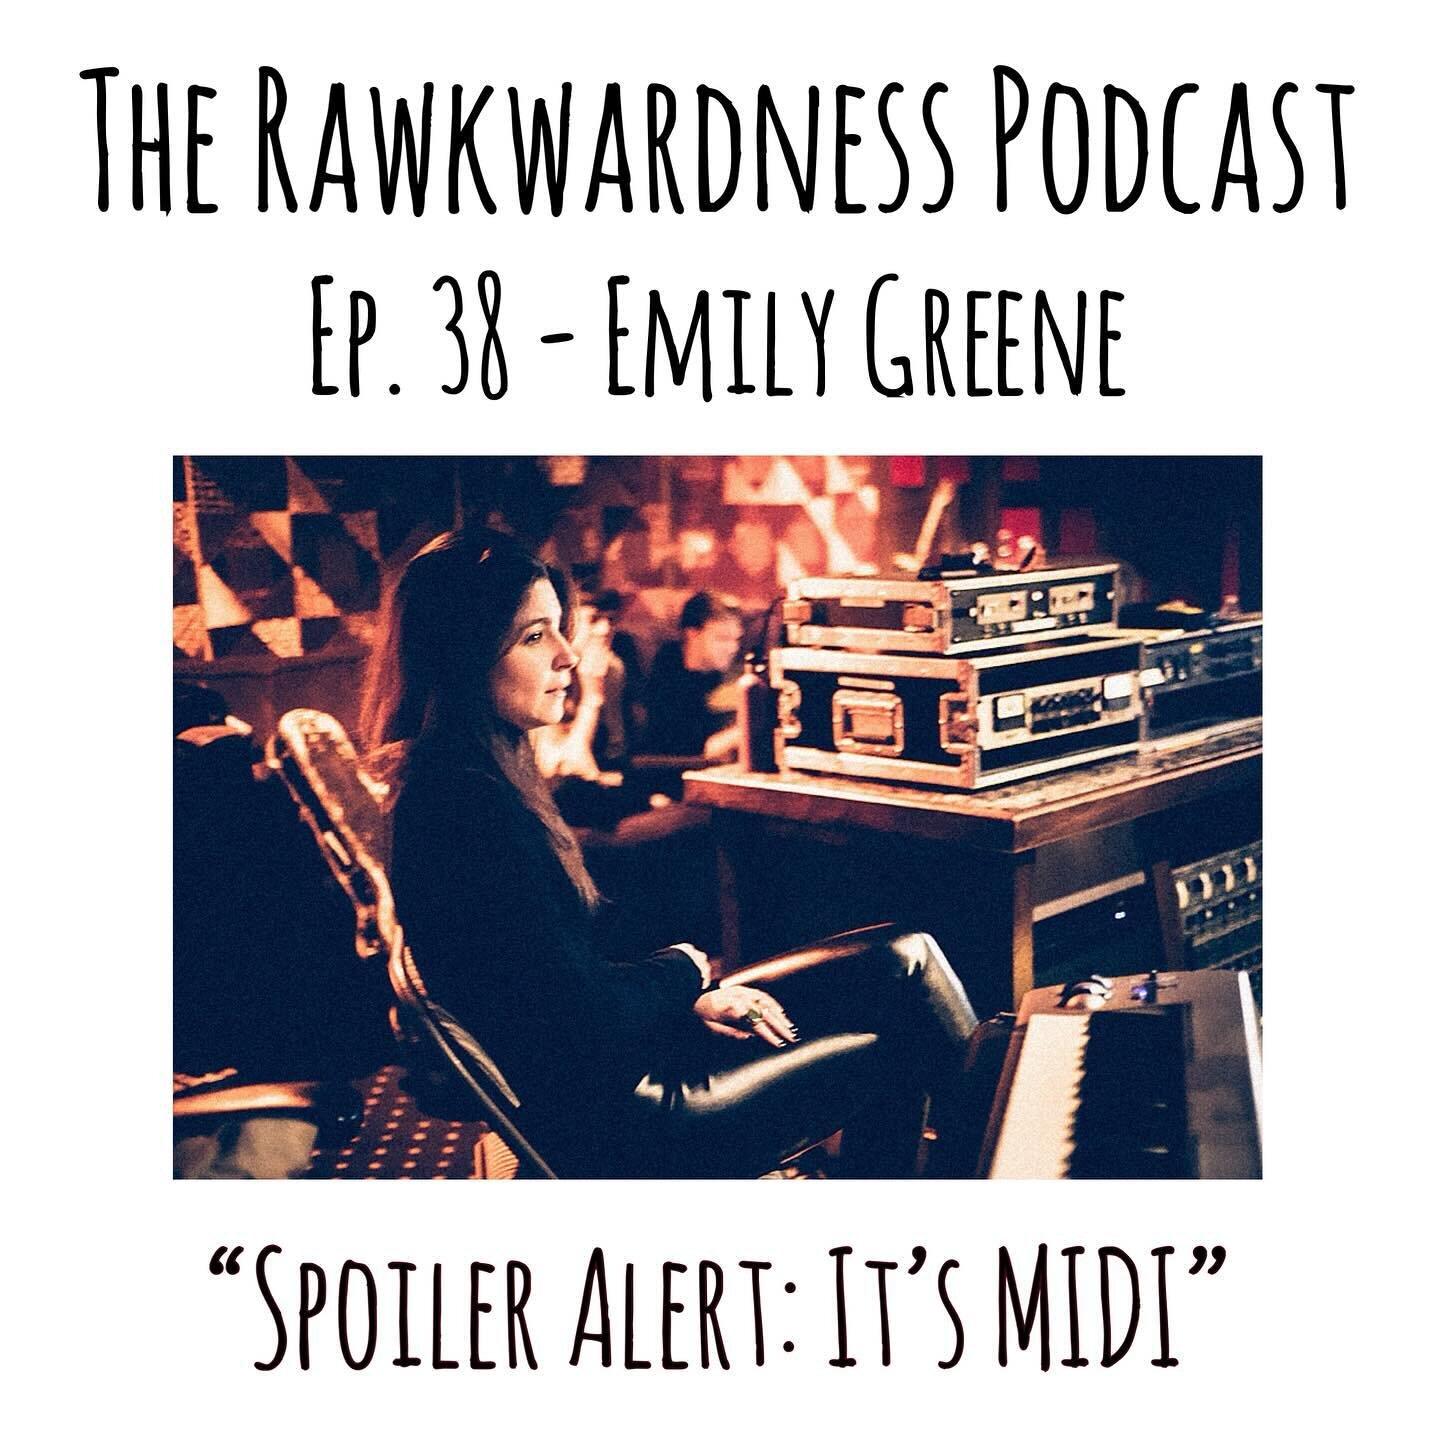 Today is Tuesday, which of course means that our new episode with @alltheworldisgreene is out on all the things! Take a listen, and swipe to see amazing proof that Emily Greene can do anything - including taekwondo 🥋